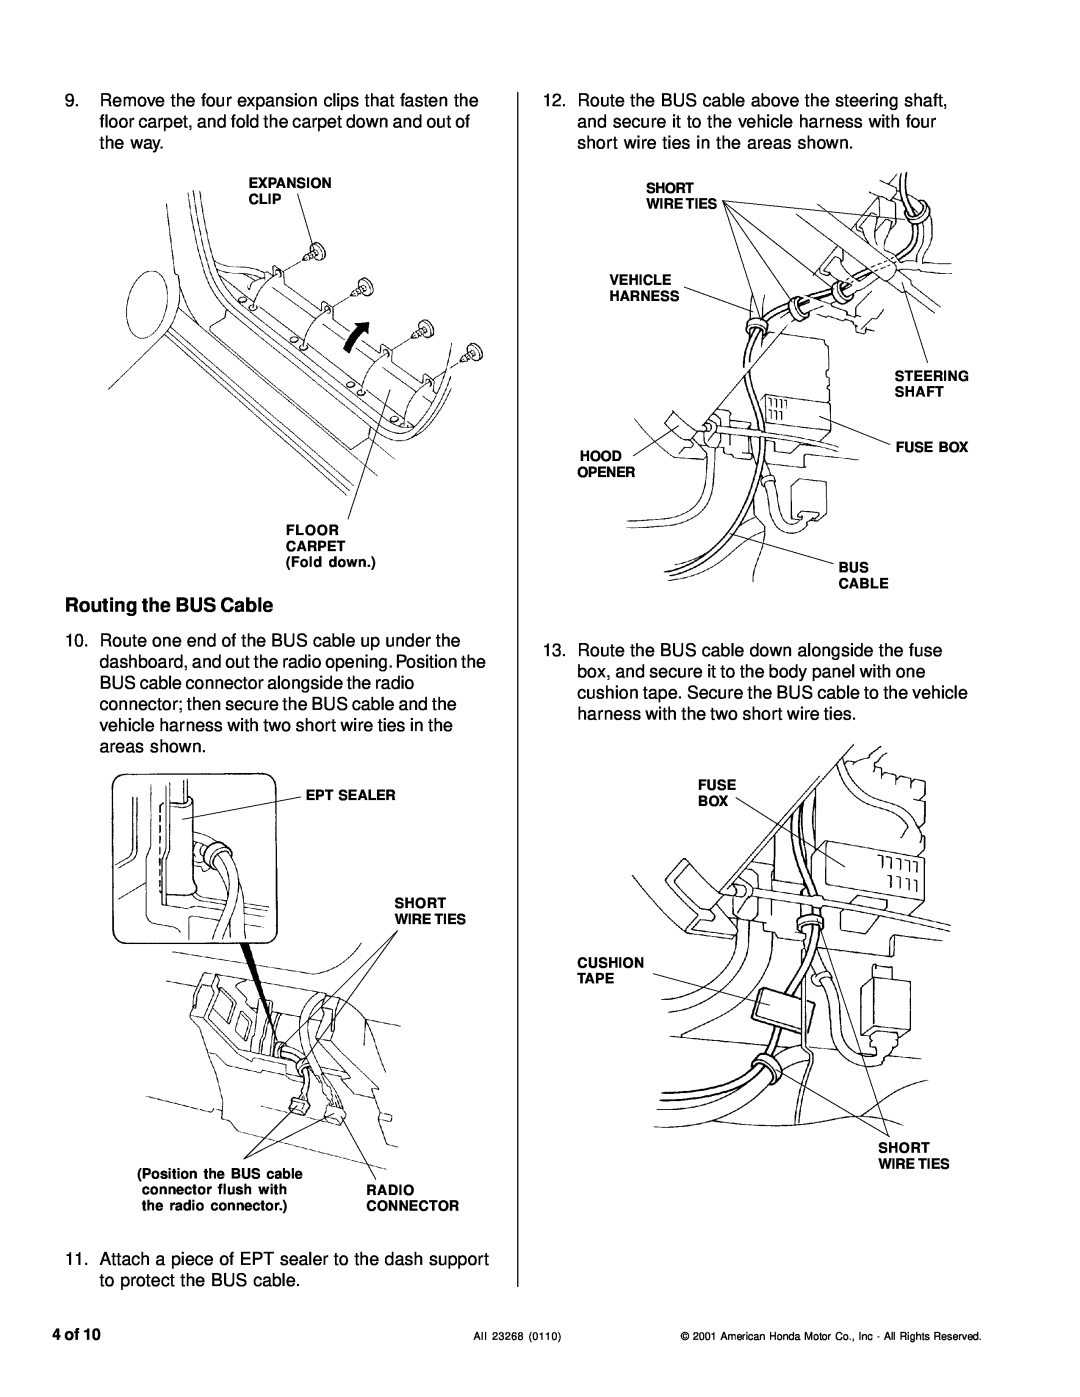 Honda Power Equipment CD Changer installation instructions Routing the BUS Cable, 4 of 